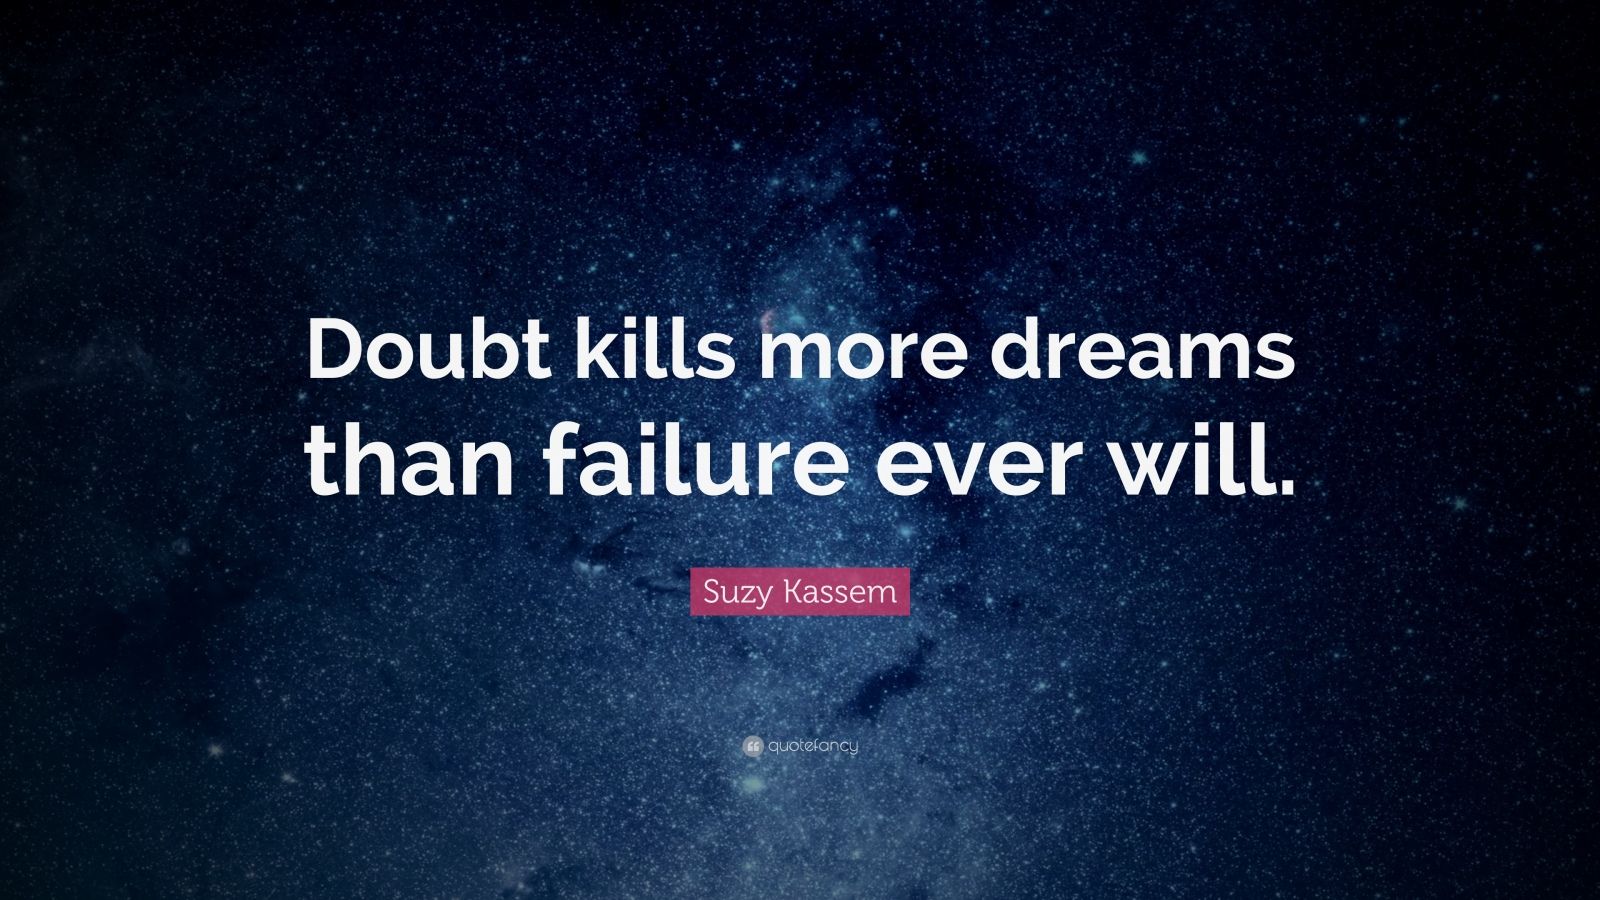 20732 Suzy Kassem Quote Doubt kills more dreams than failure ever will